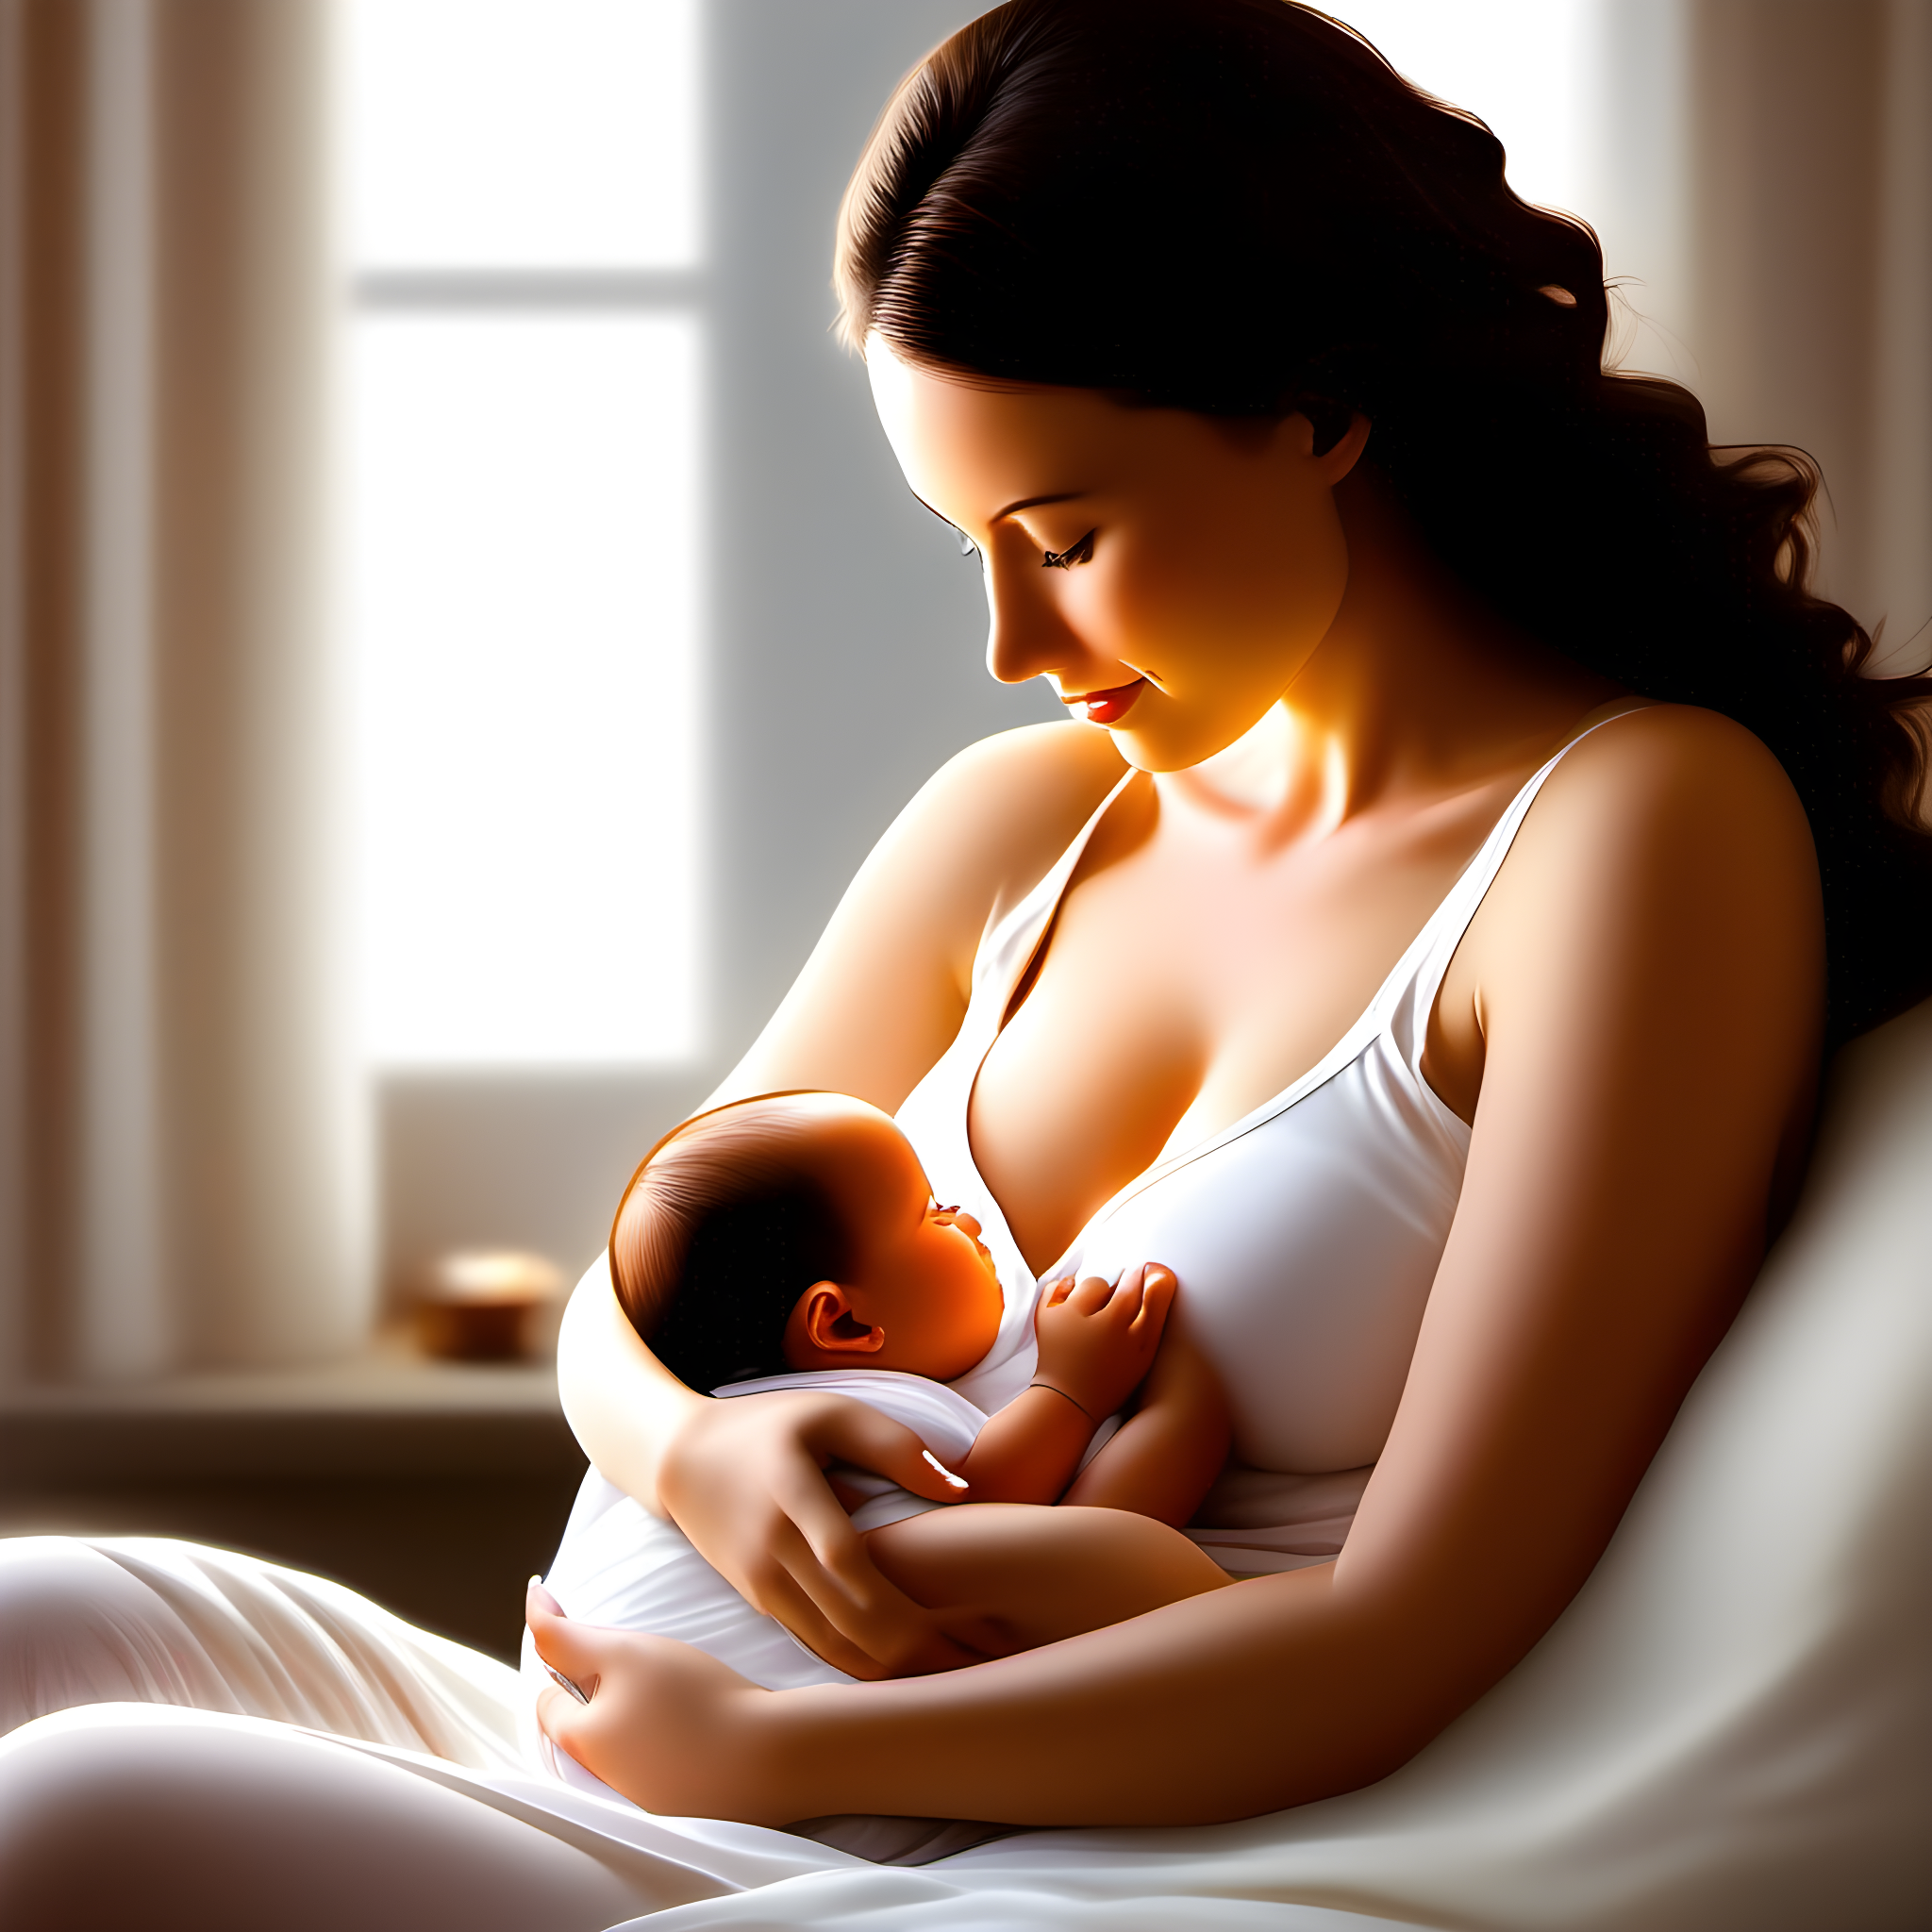 Breastfeeding Strike: My Baby Won't Nurse - Causes and Solutions